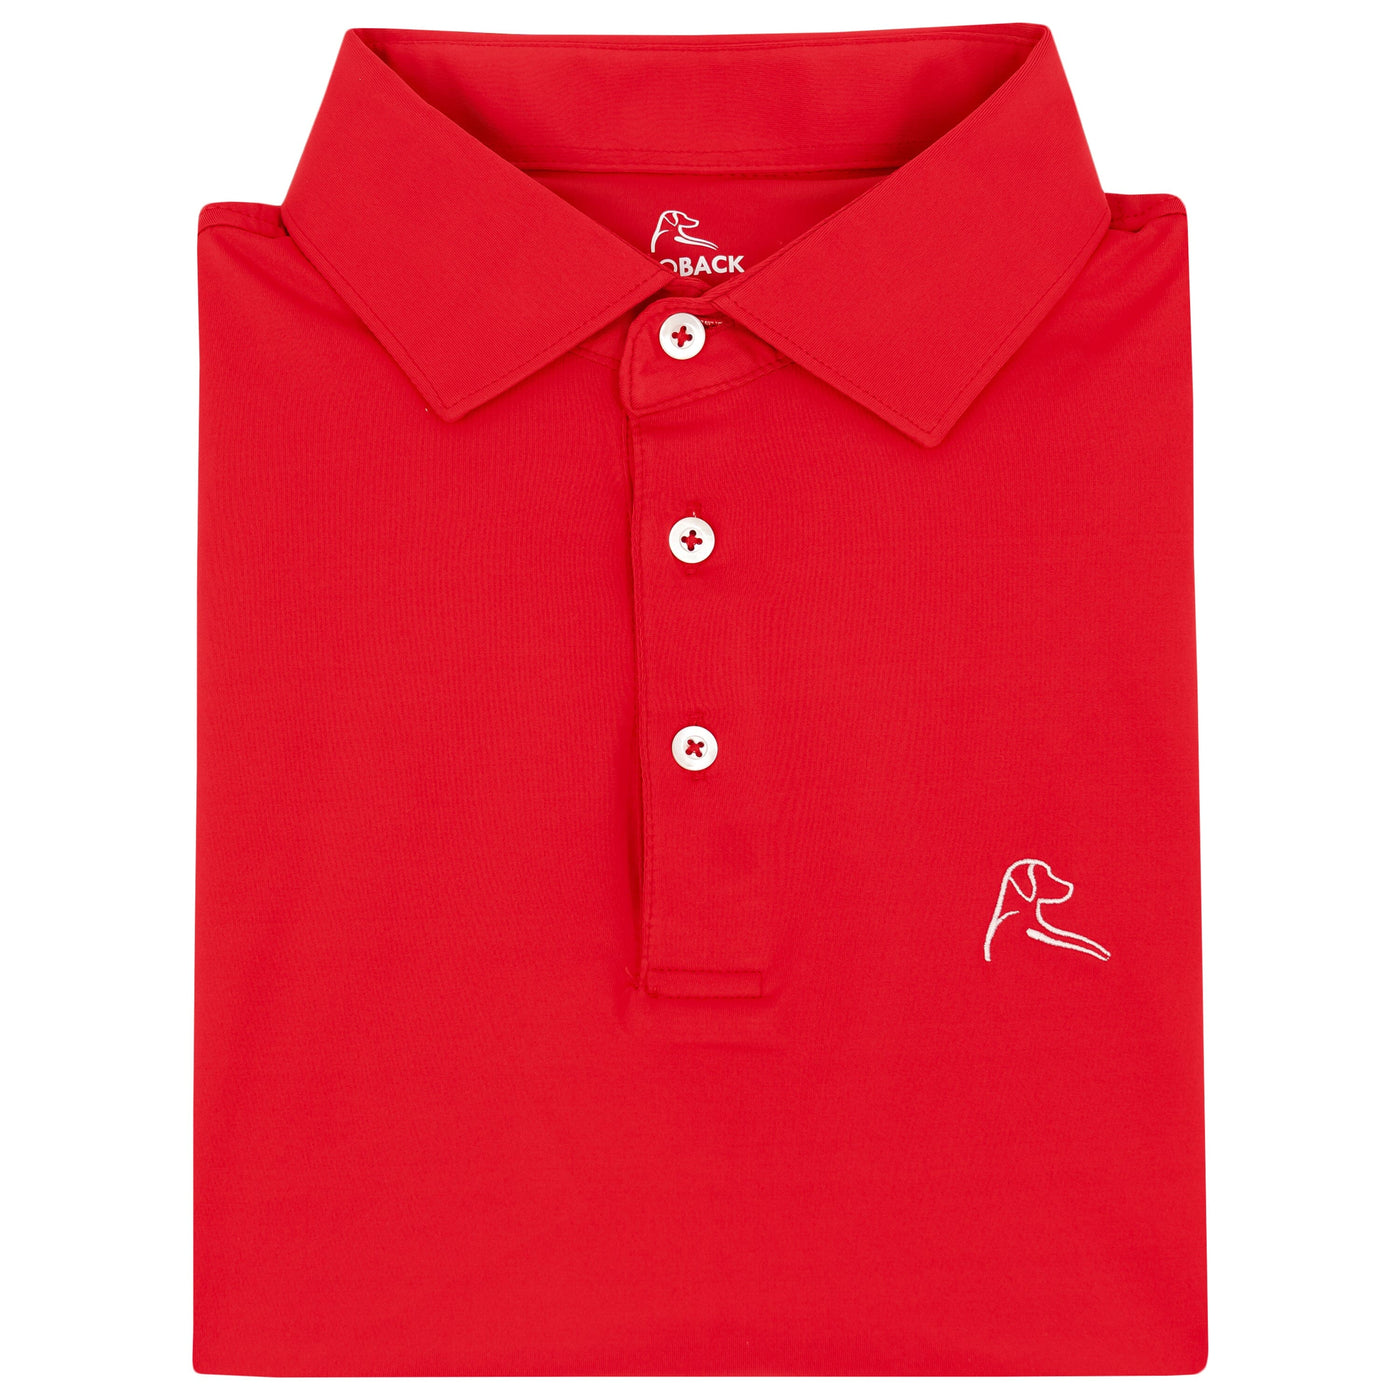 The Classic Red Polo